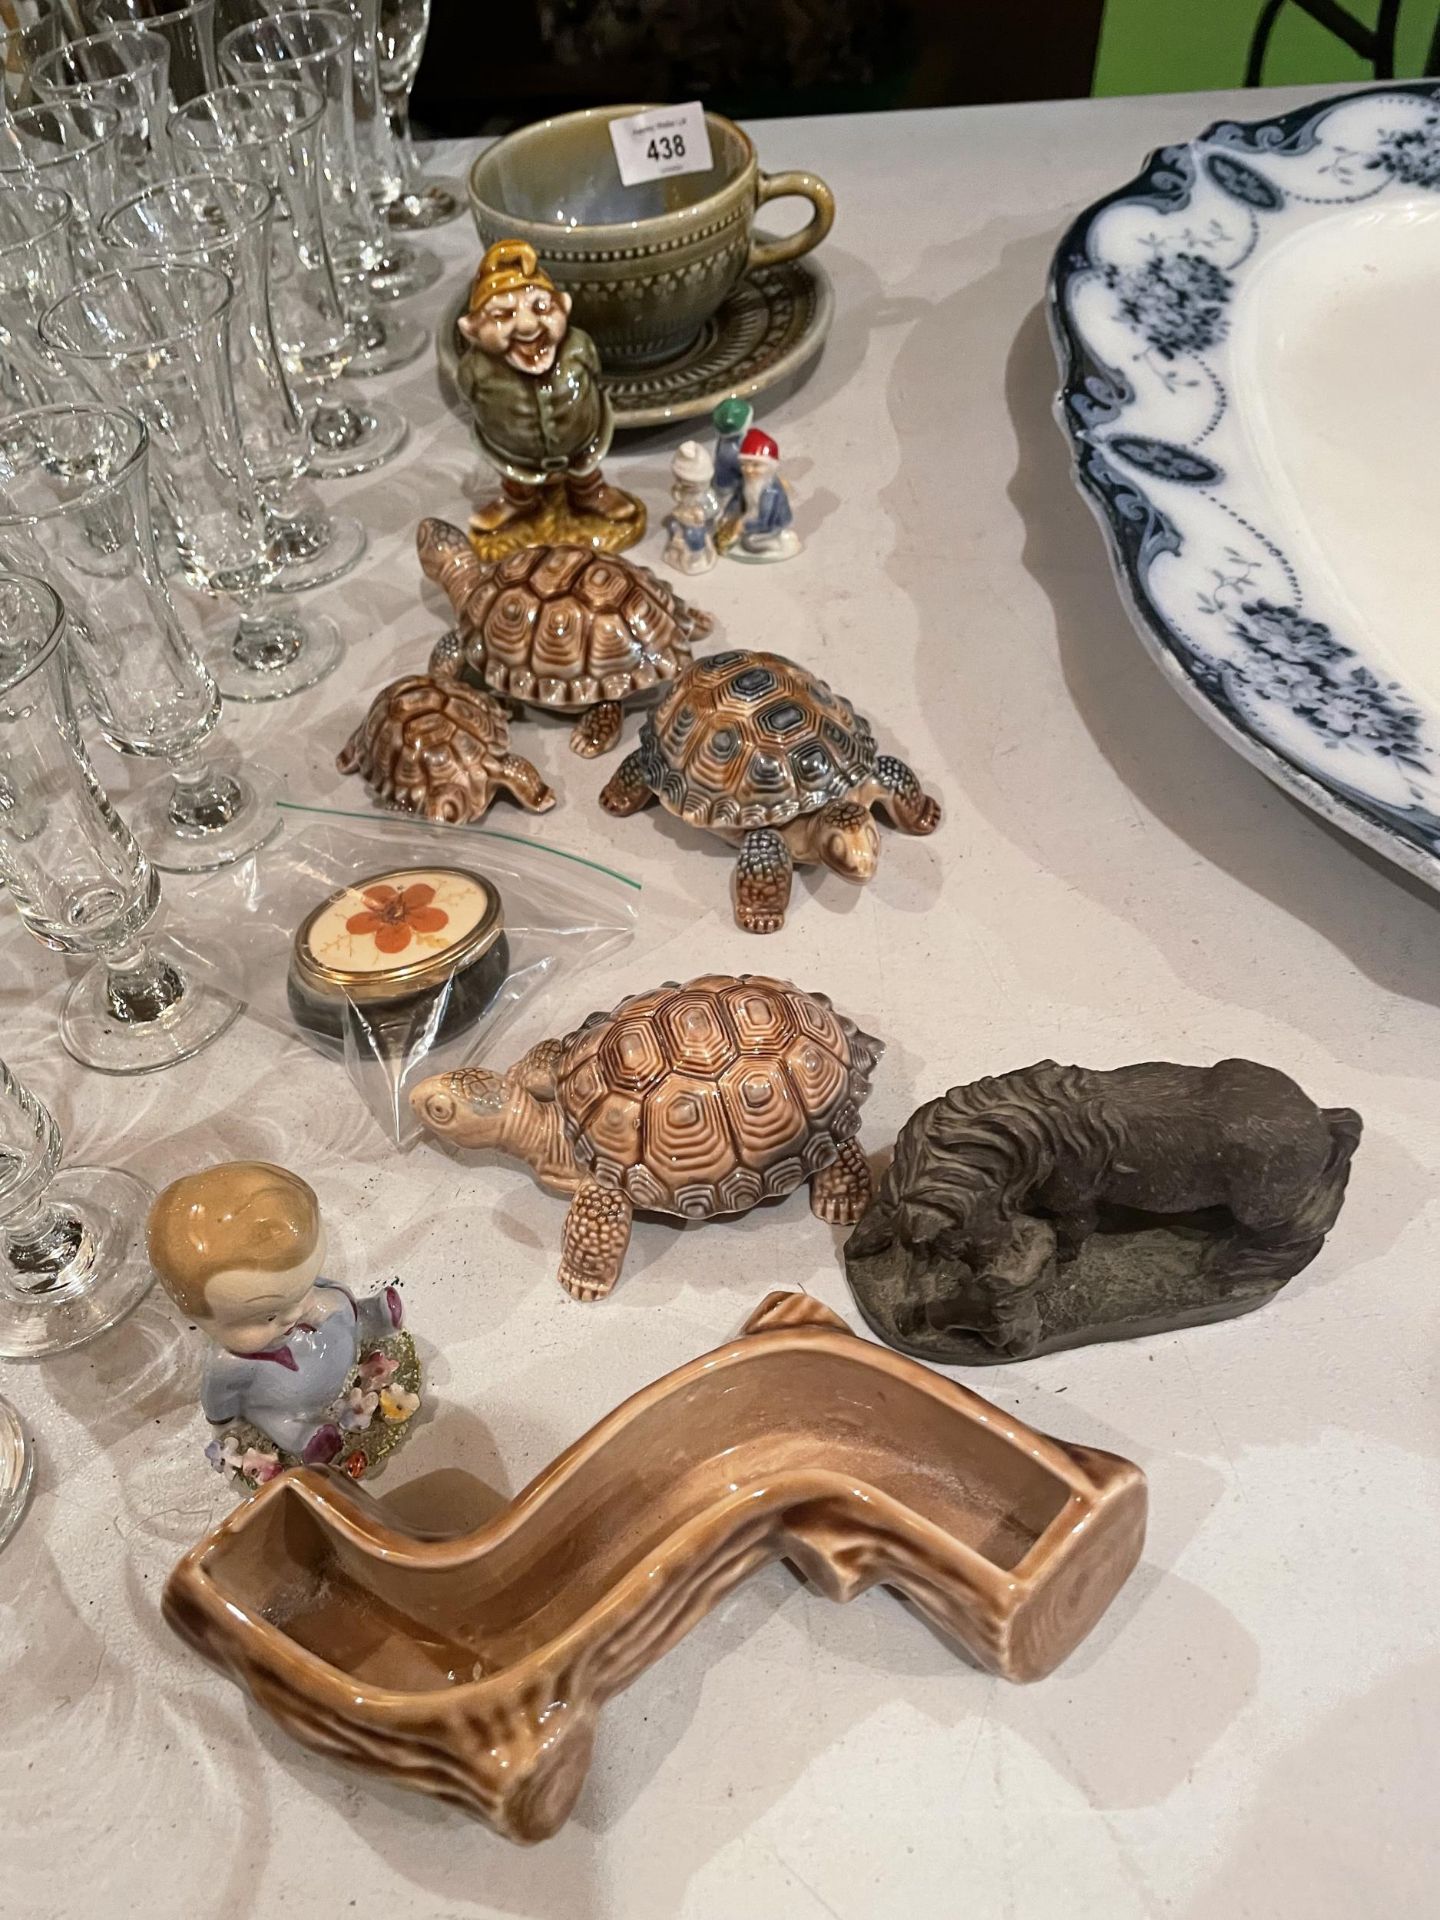 A SELECTION OF WADE POTTERY CONTAINING SEVERAL TORTOISE DISHES